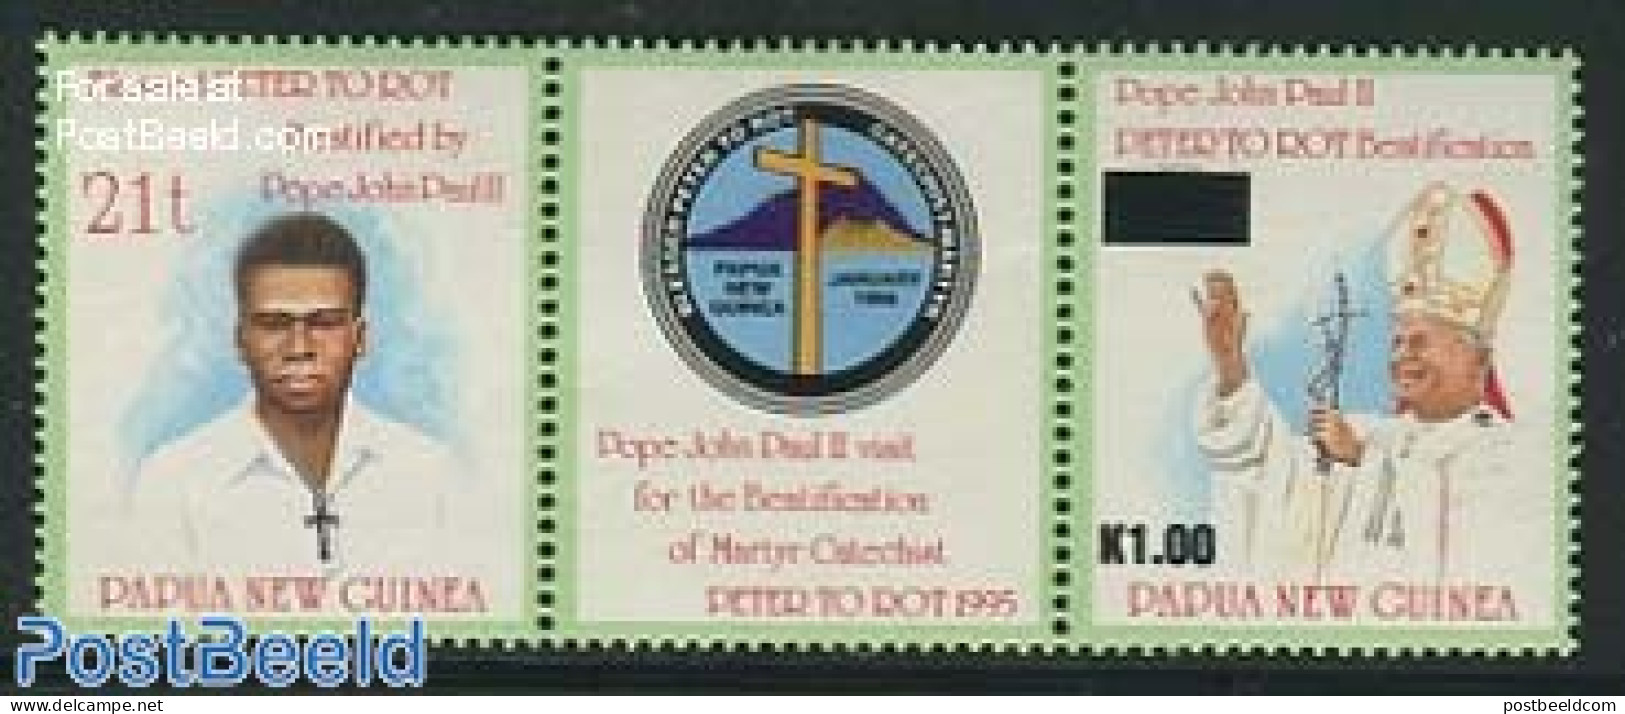 Papua New Guinea 1995 Peter To Rot 2v+tab [:T:], Mint NH, Religion - Pope - Religion - Papes